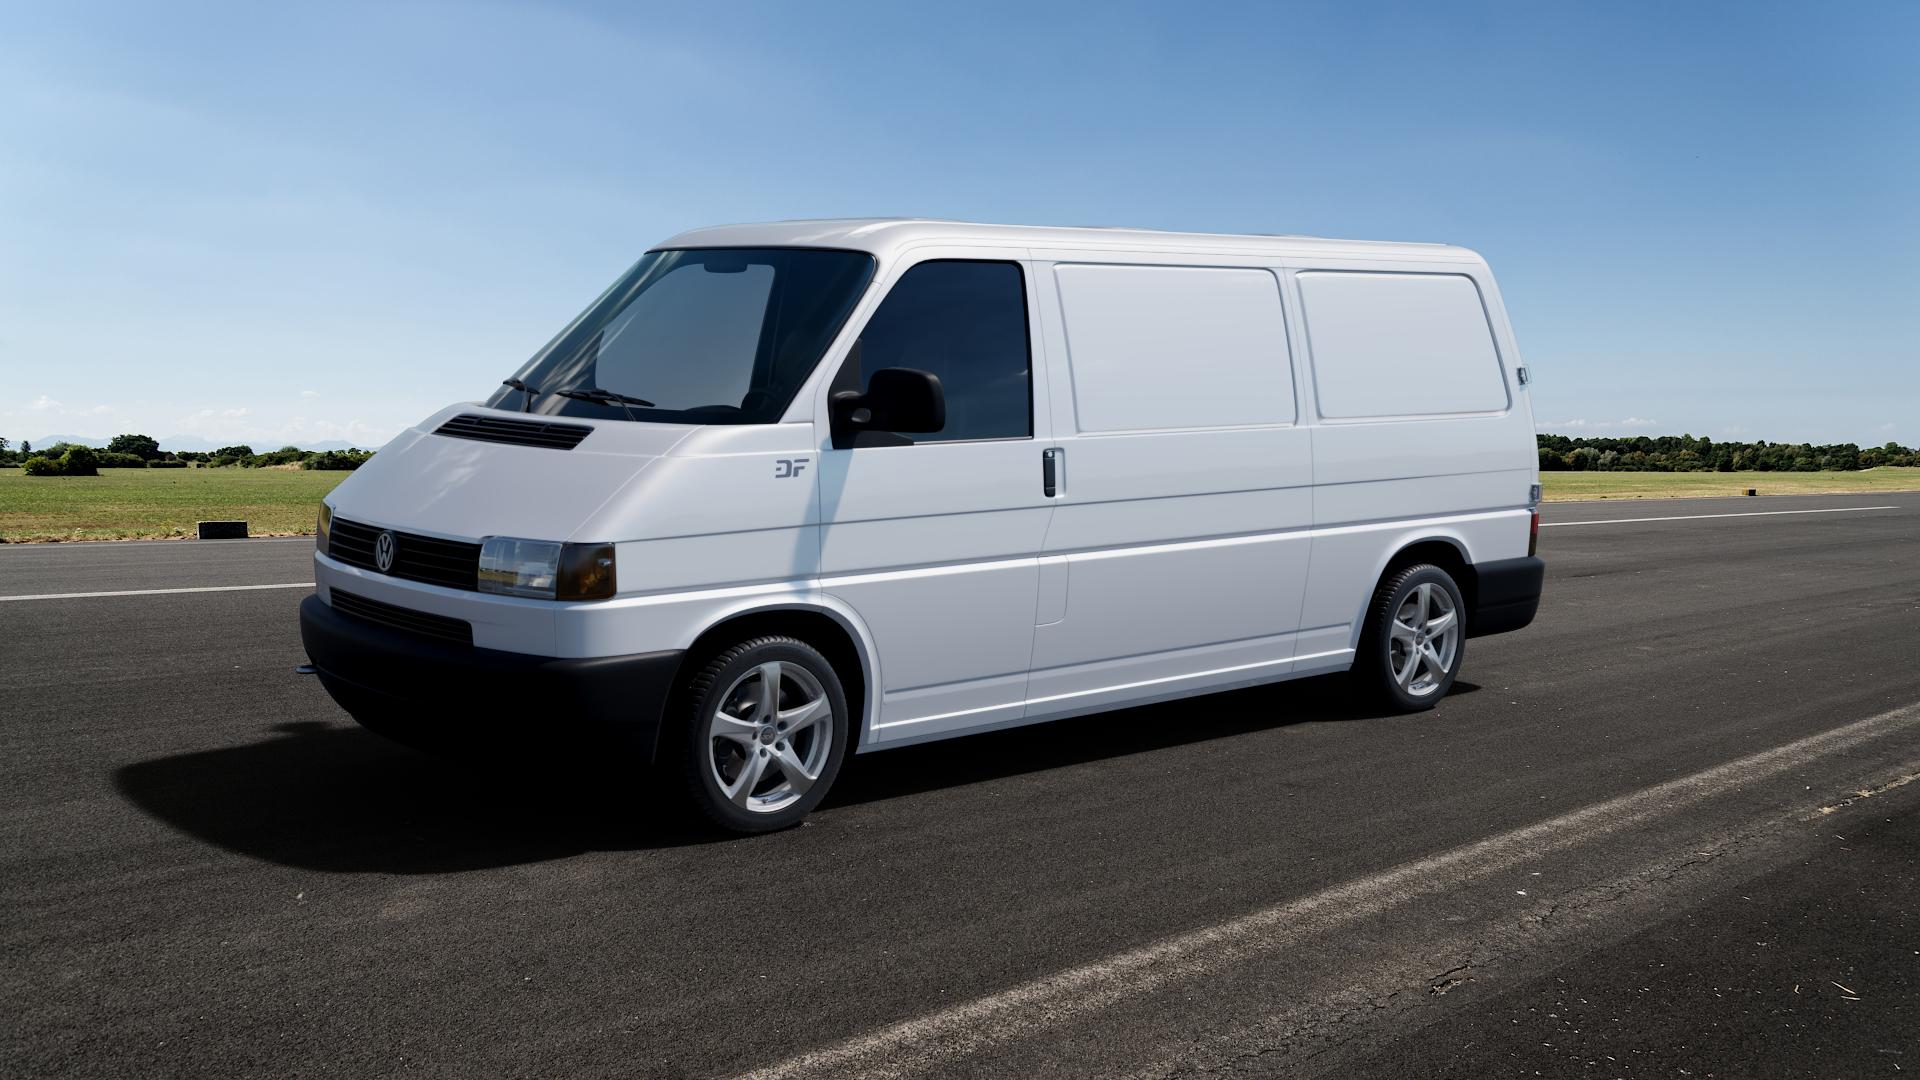 Volkswagen (VW) T4 Transporter 1,9l D 44kW (60 hp) Wheels and Tyre Packages  | velonity.com